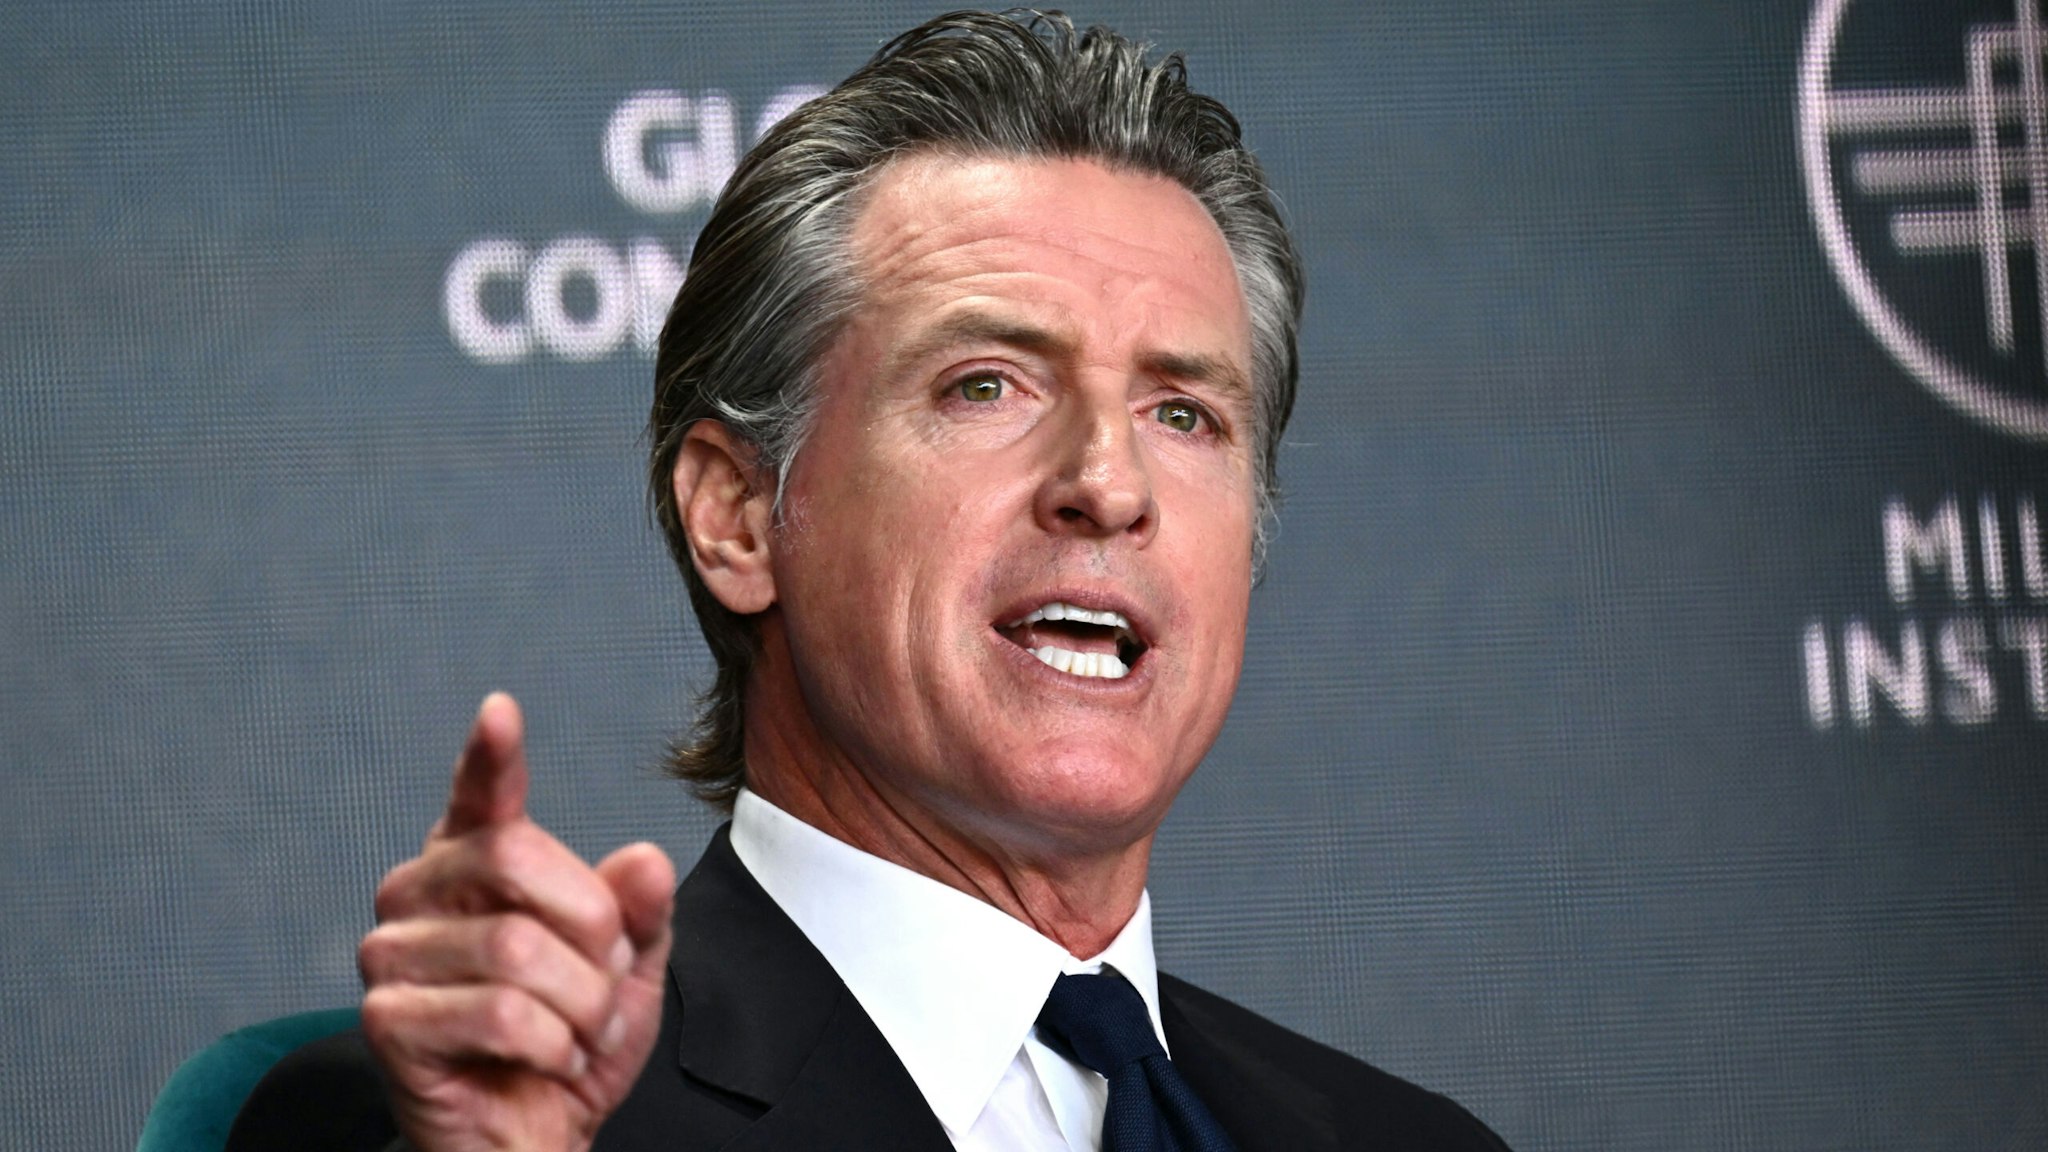 California Governor Gavin Newsom speaks during the Milken Institute Global Conference in Beverly Hills, California on May 2, 2023.